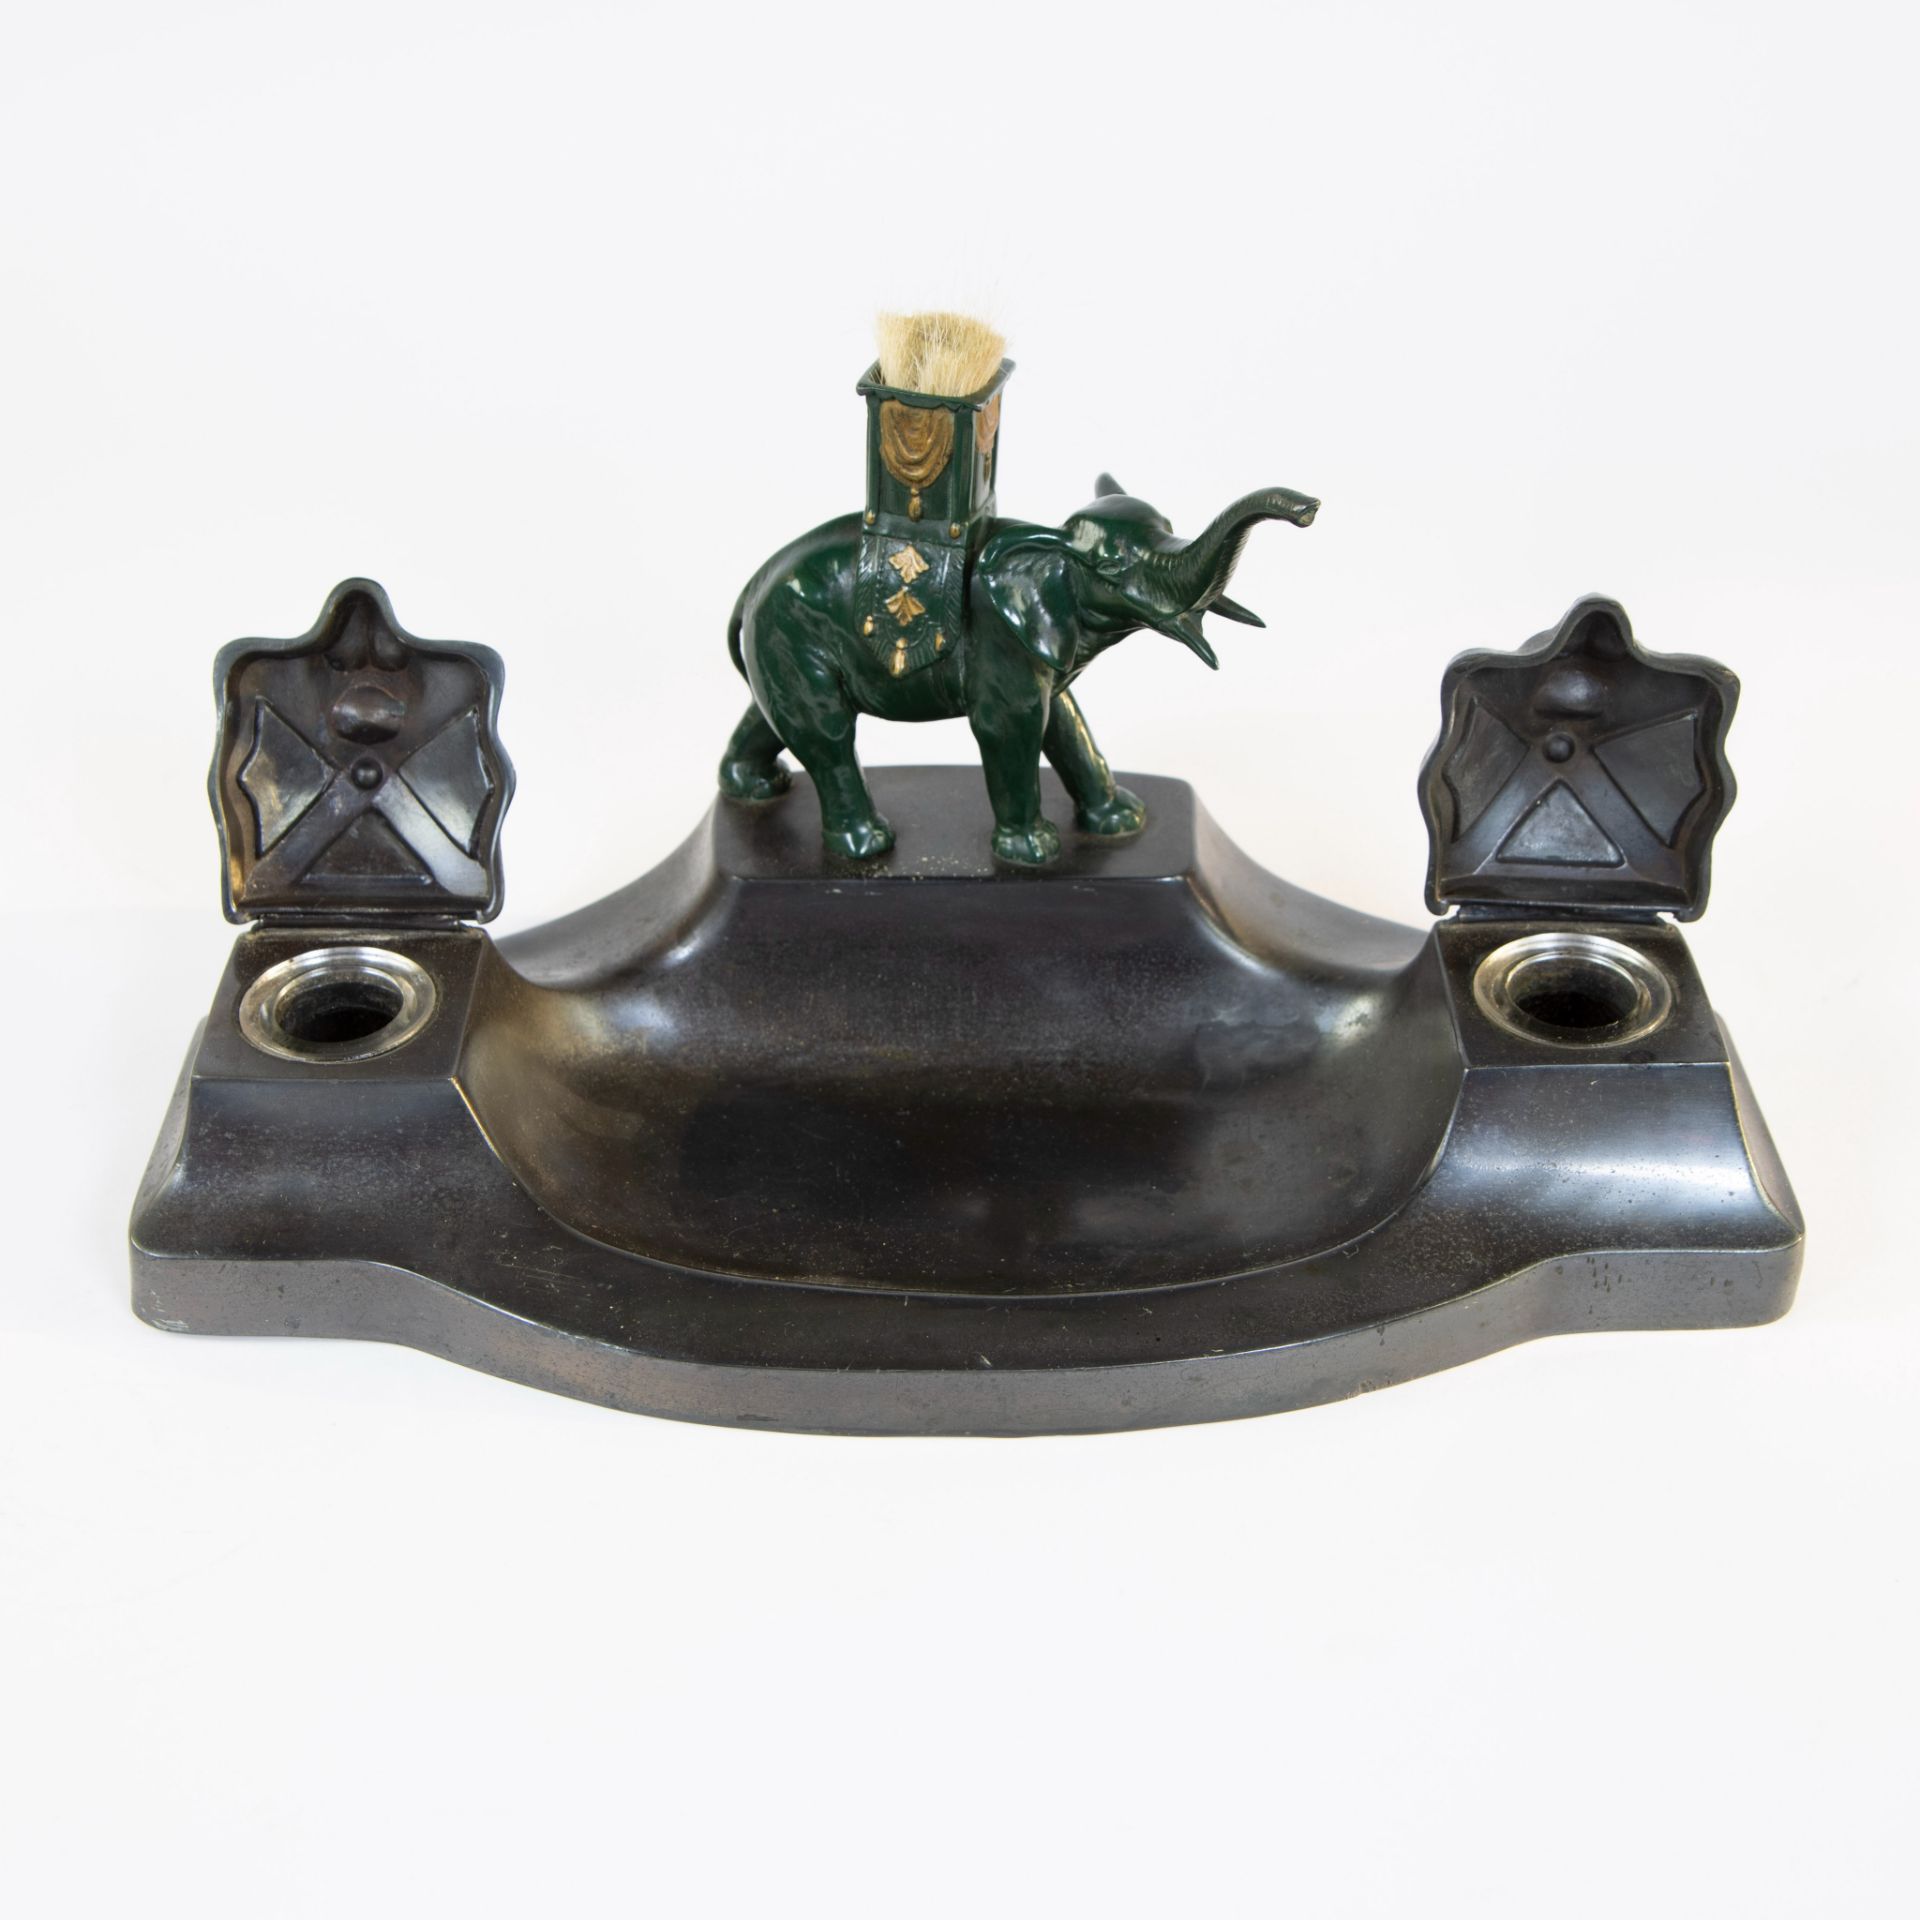 Art Deco inkwell with oriental decor, 1930s - Image 2 of 5